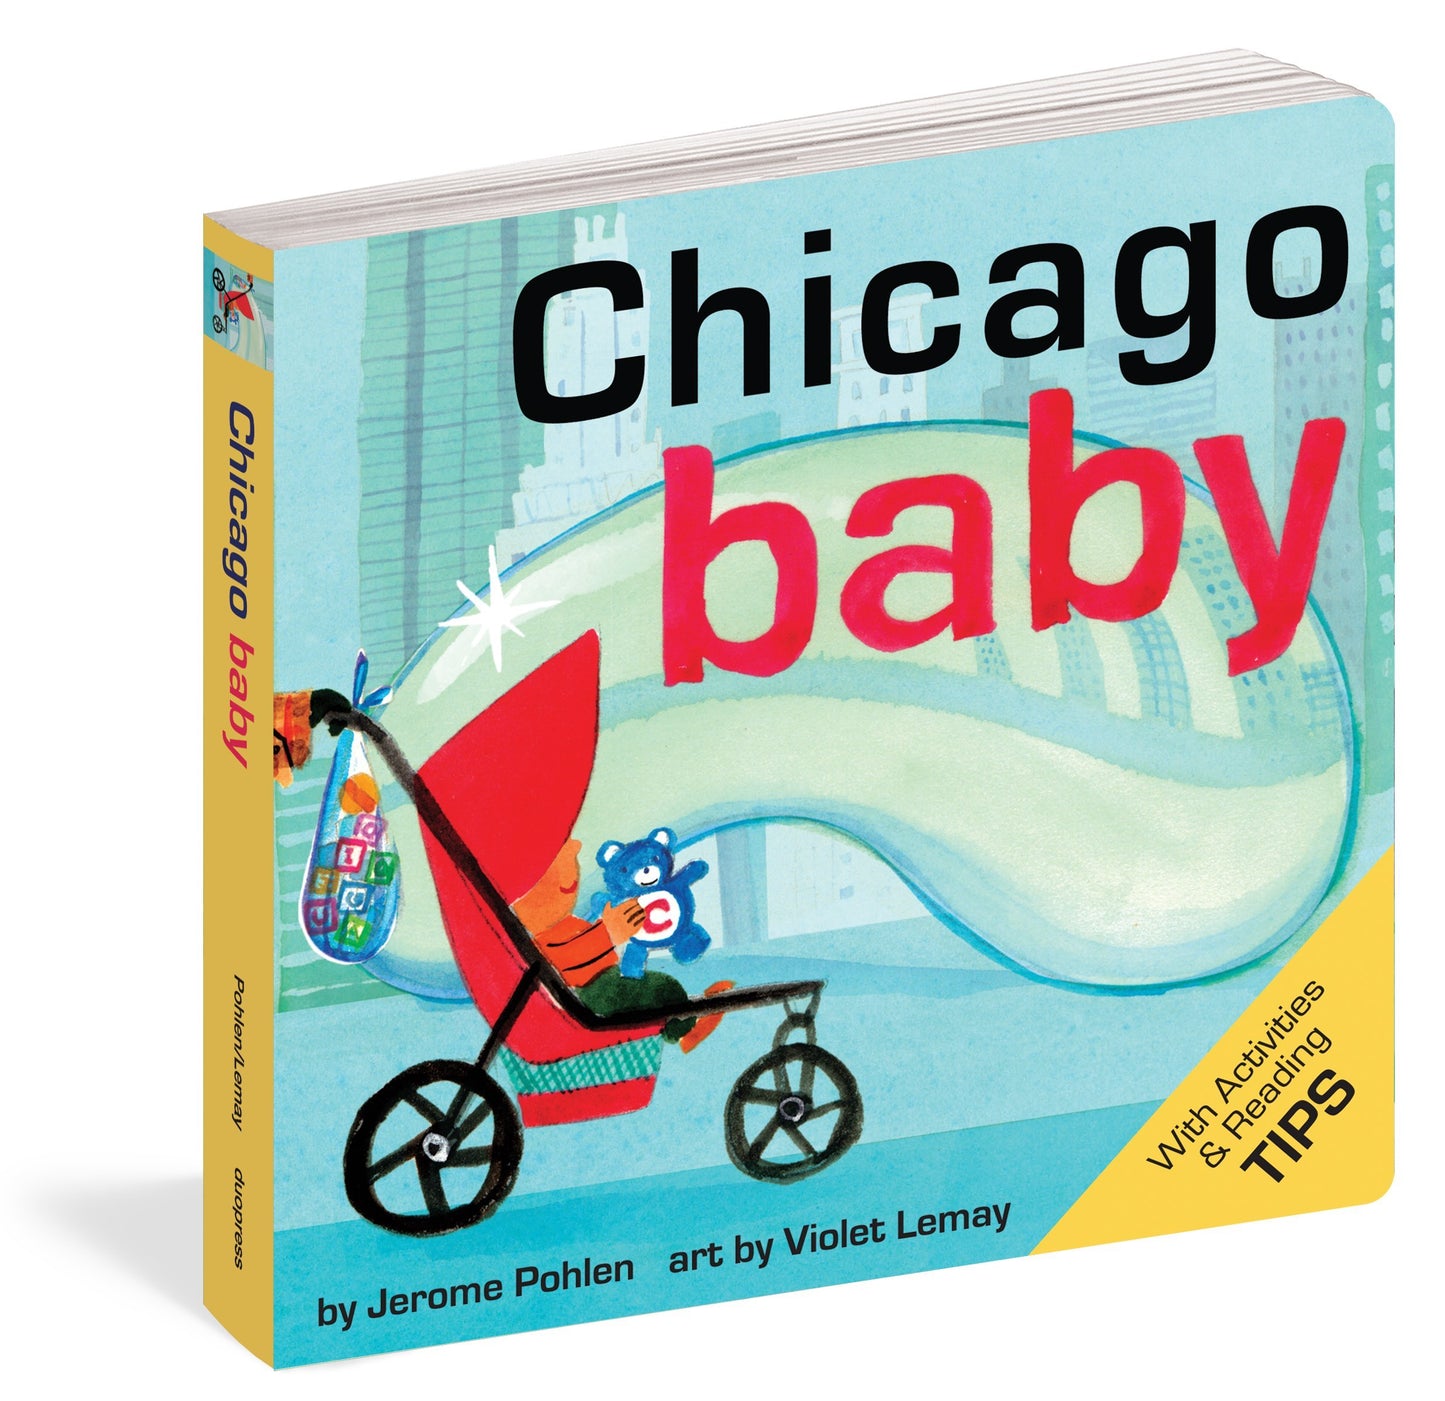 Chicago Baby Board Book